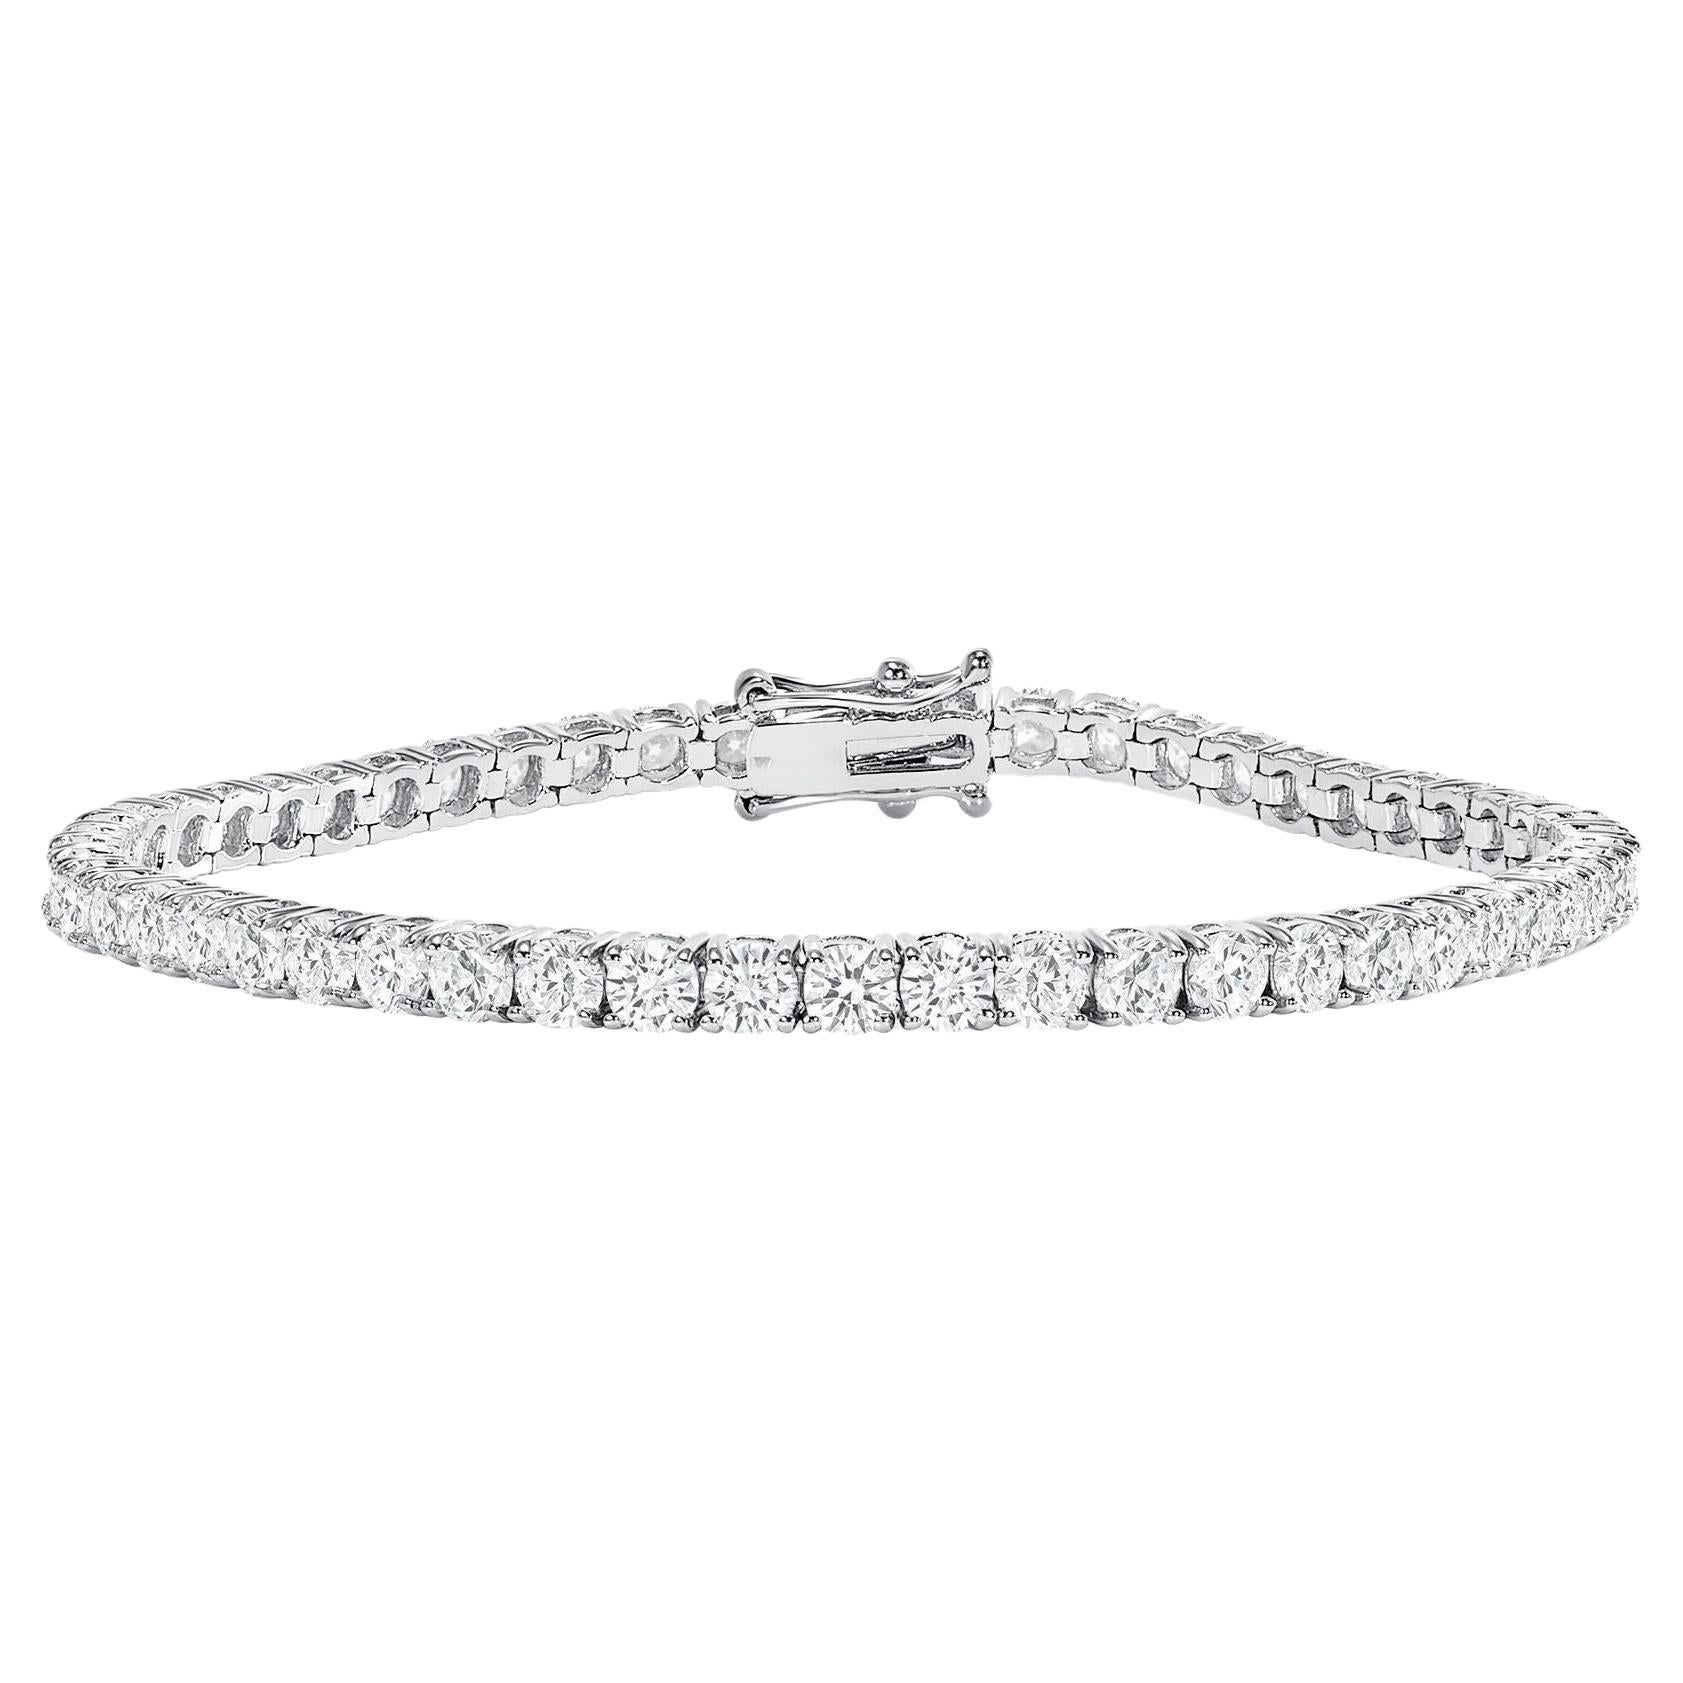 This diamond tennis bracelet features beautifully cut natural earth mined round diamonds set gorgeously in 14k gold.

Bracelet Information
Metal : 14k Gold
Diamond Cut : Round Natural Diamond
Total Diamond Carats : 2ttcw
Diamond Clarity : VS
Diamond